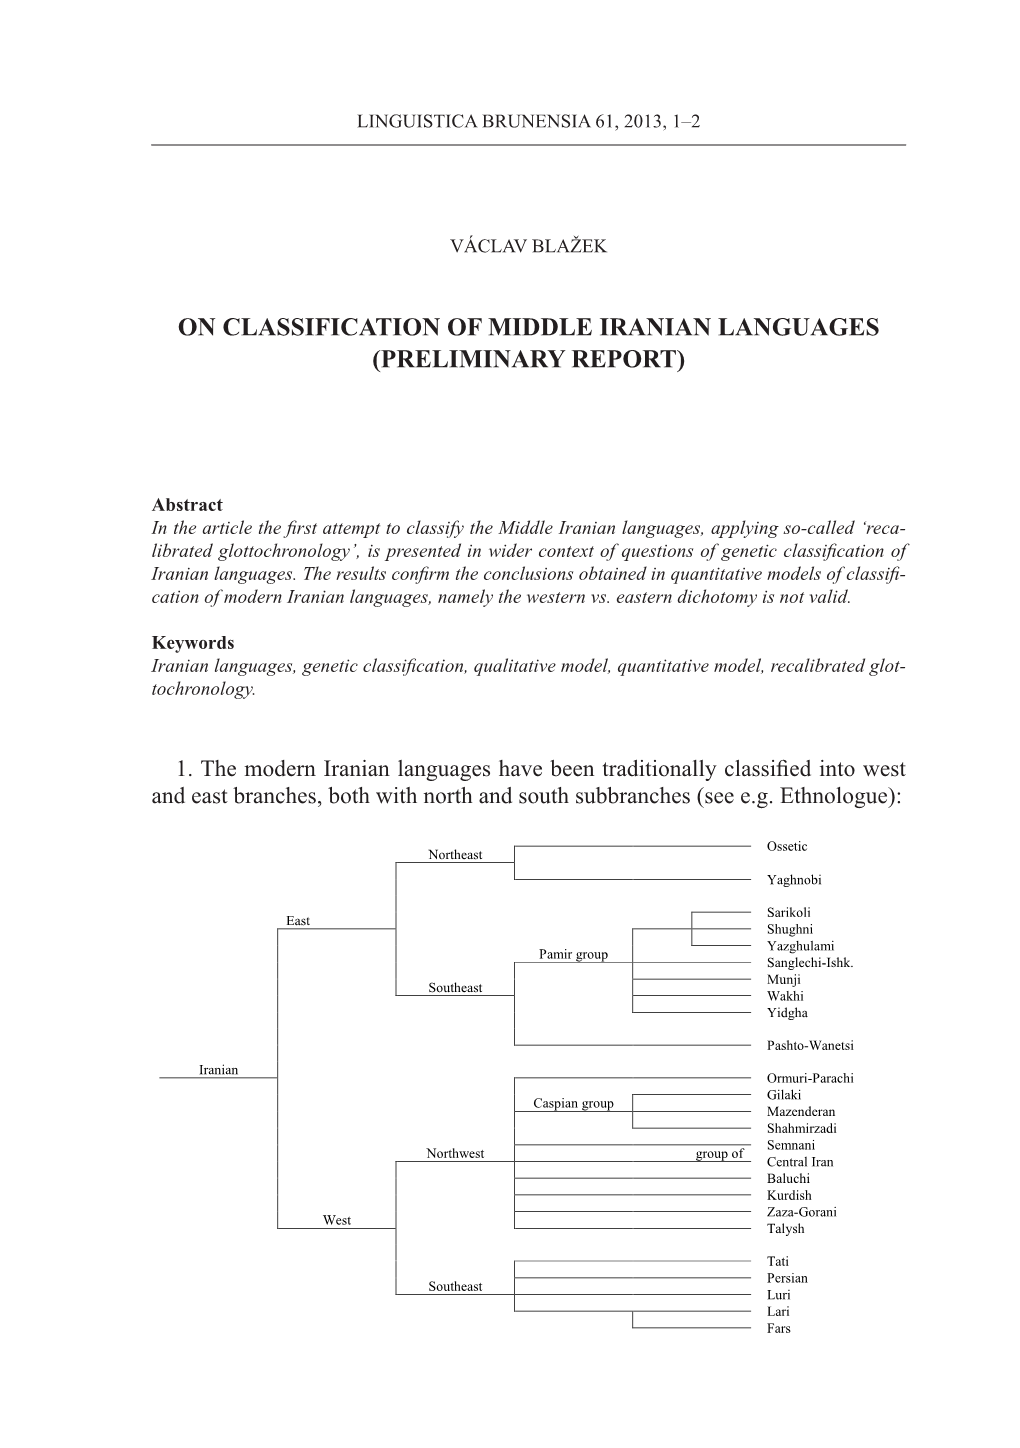 On Classification of Middle Iranian Languages (Preliminary Report)